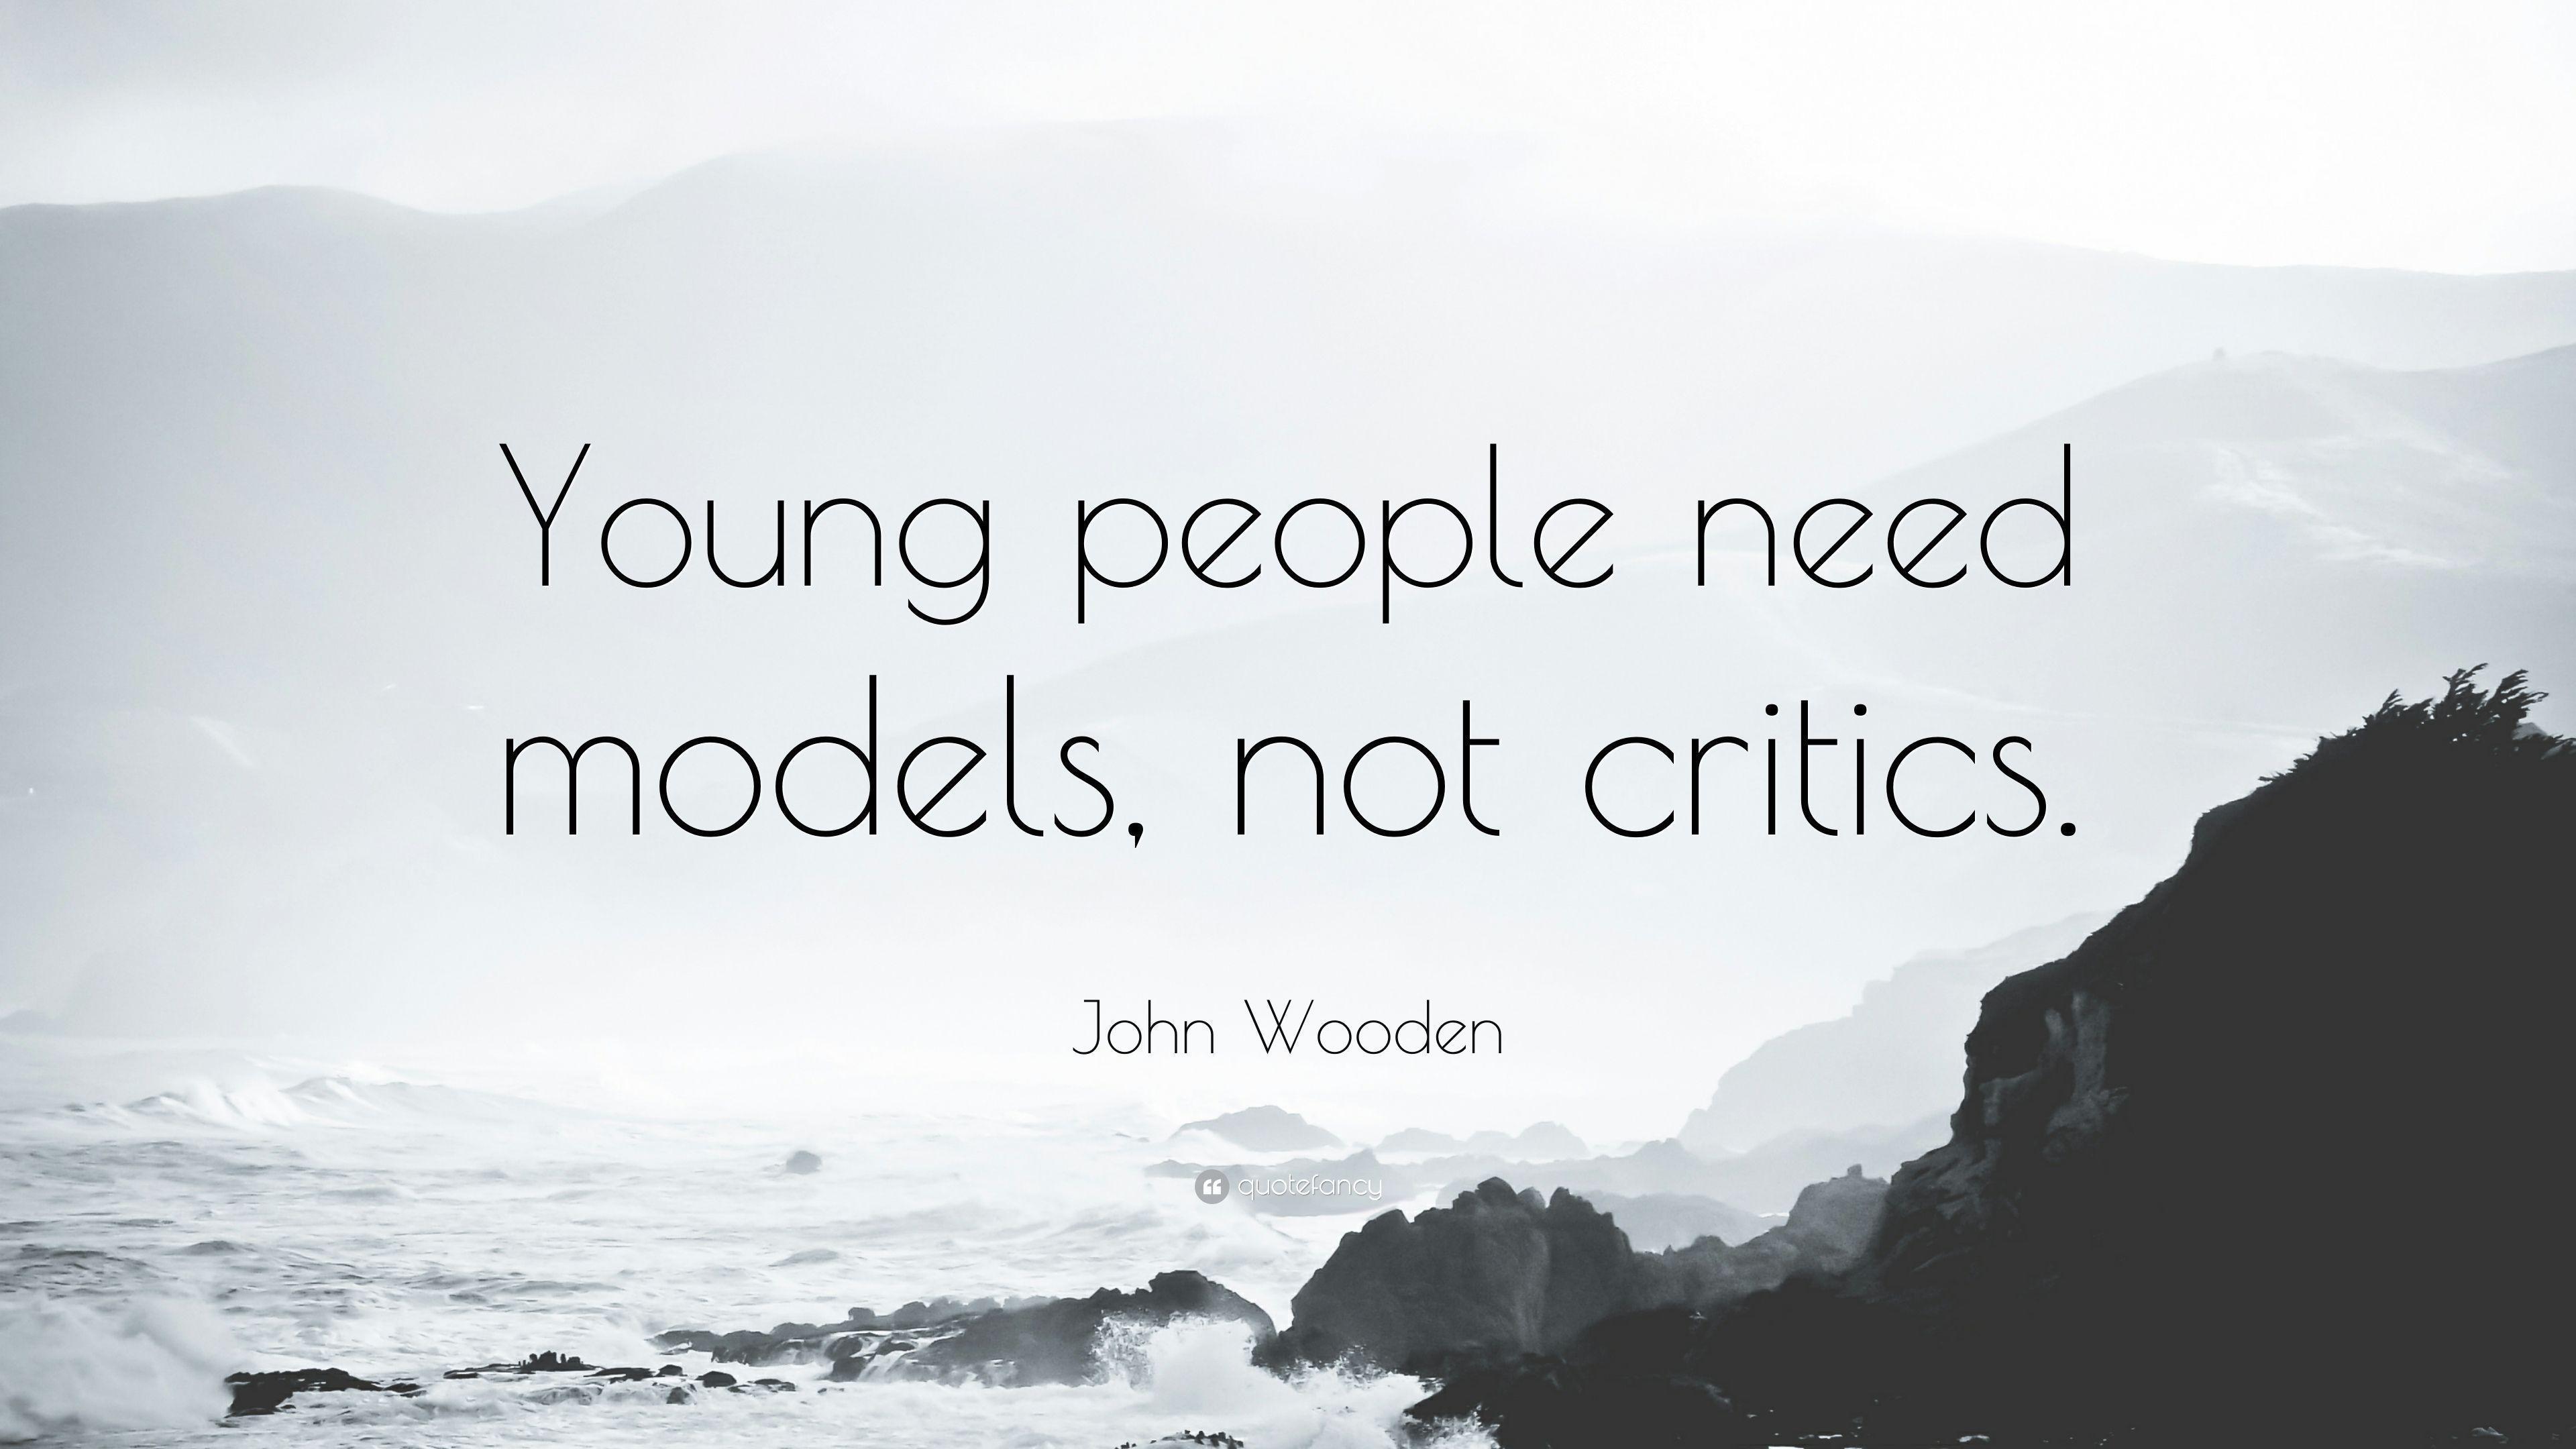 John Wooden Quote: “Young people need models, not critics.” 18